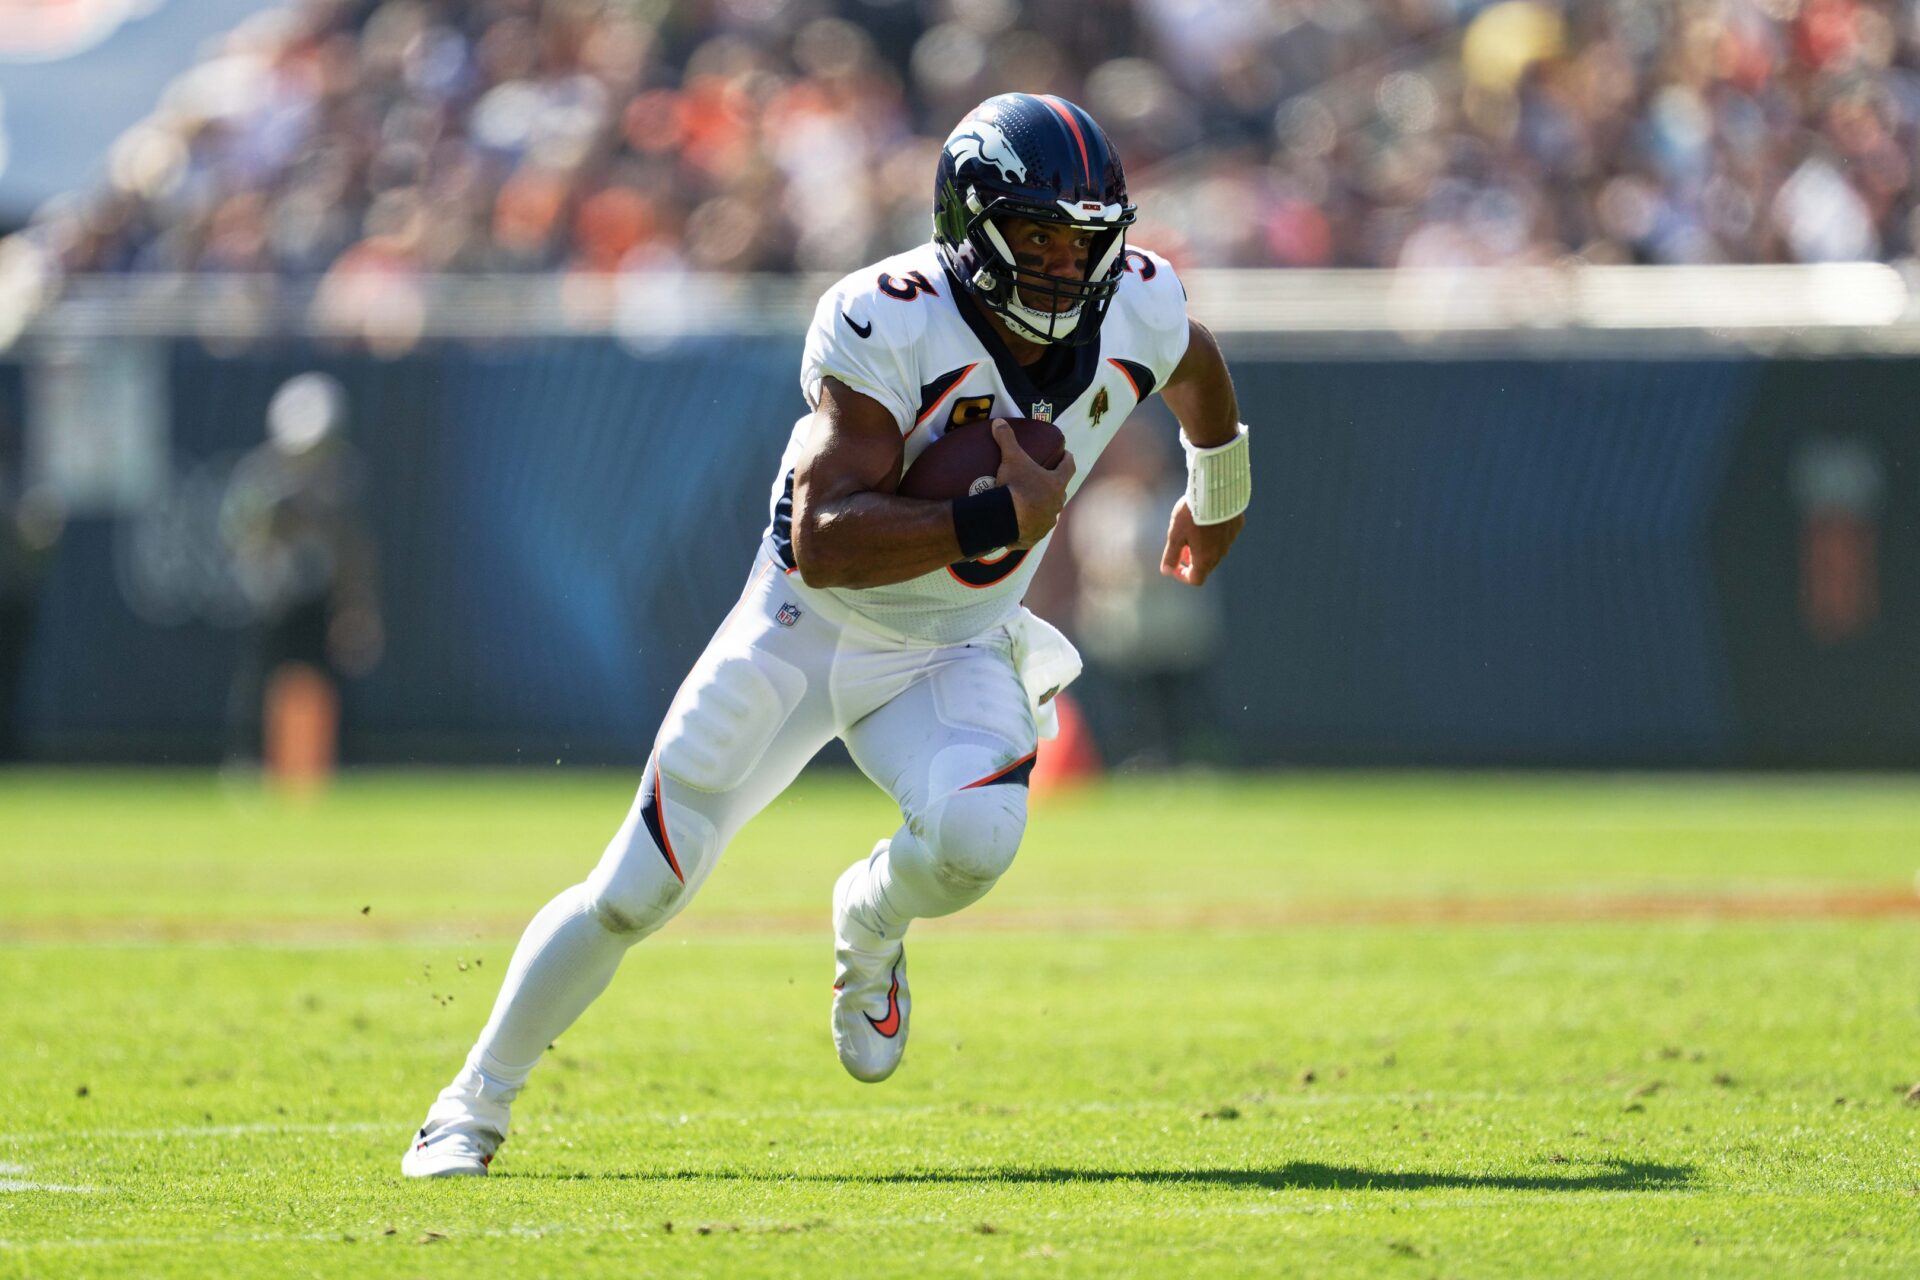 Pittsburgh Steelers Pursue QB Russell Wilson; Ravens Make Moves in